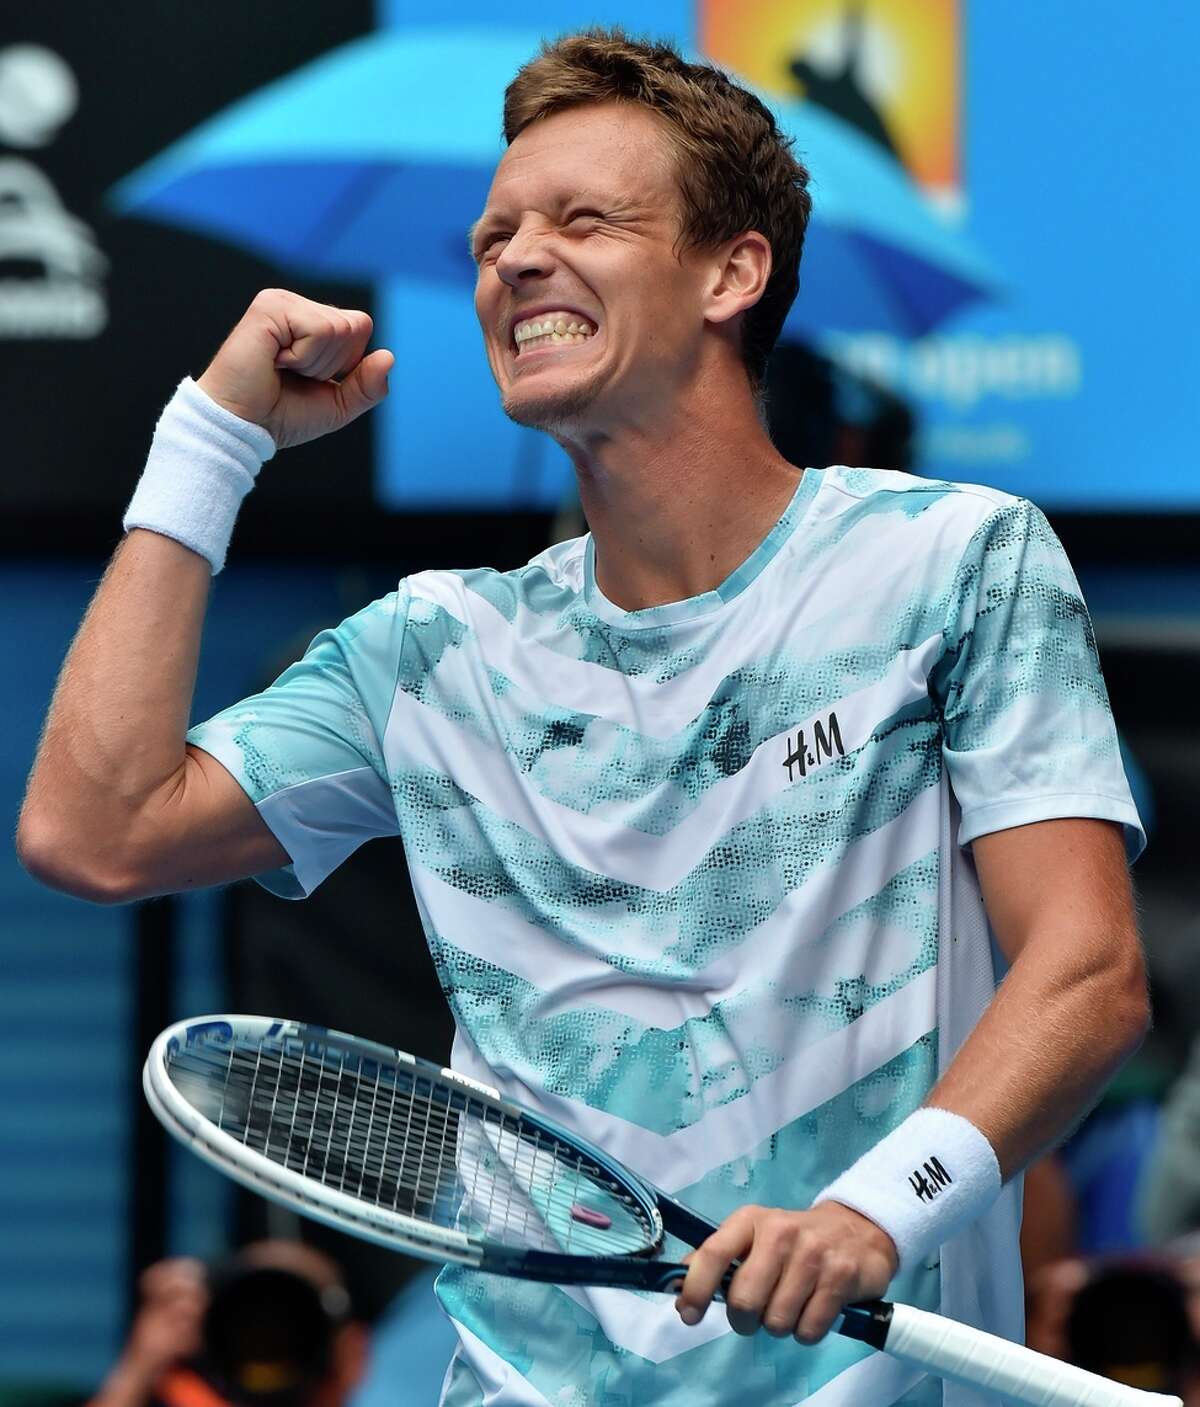 The Czech Republic’s Tomas Berdych, the seventh seed, finally put away Spain’s Rafael Nadal on his fourth match point.